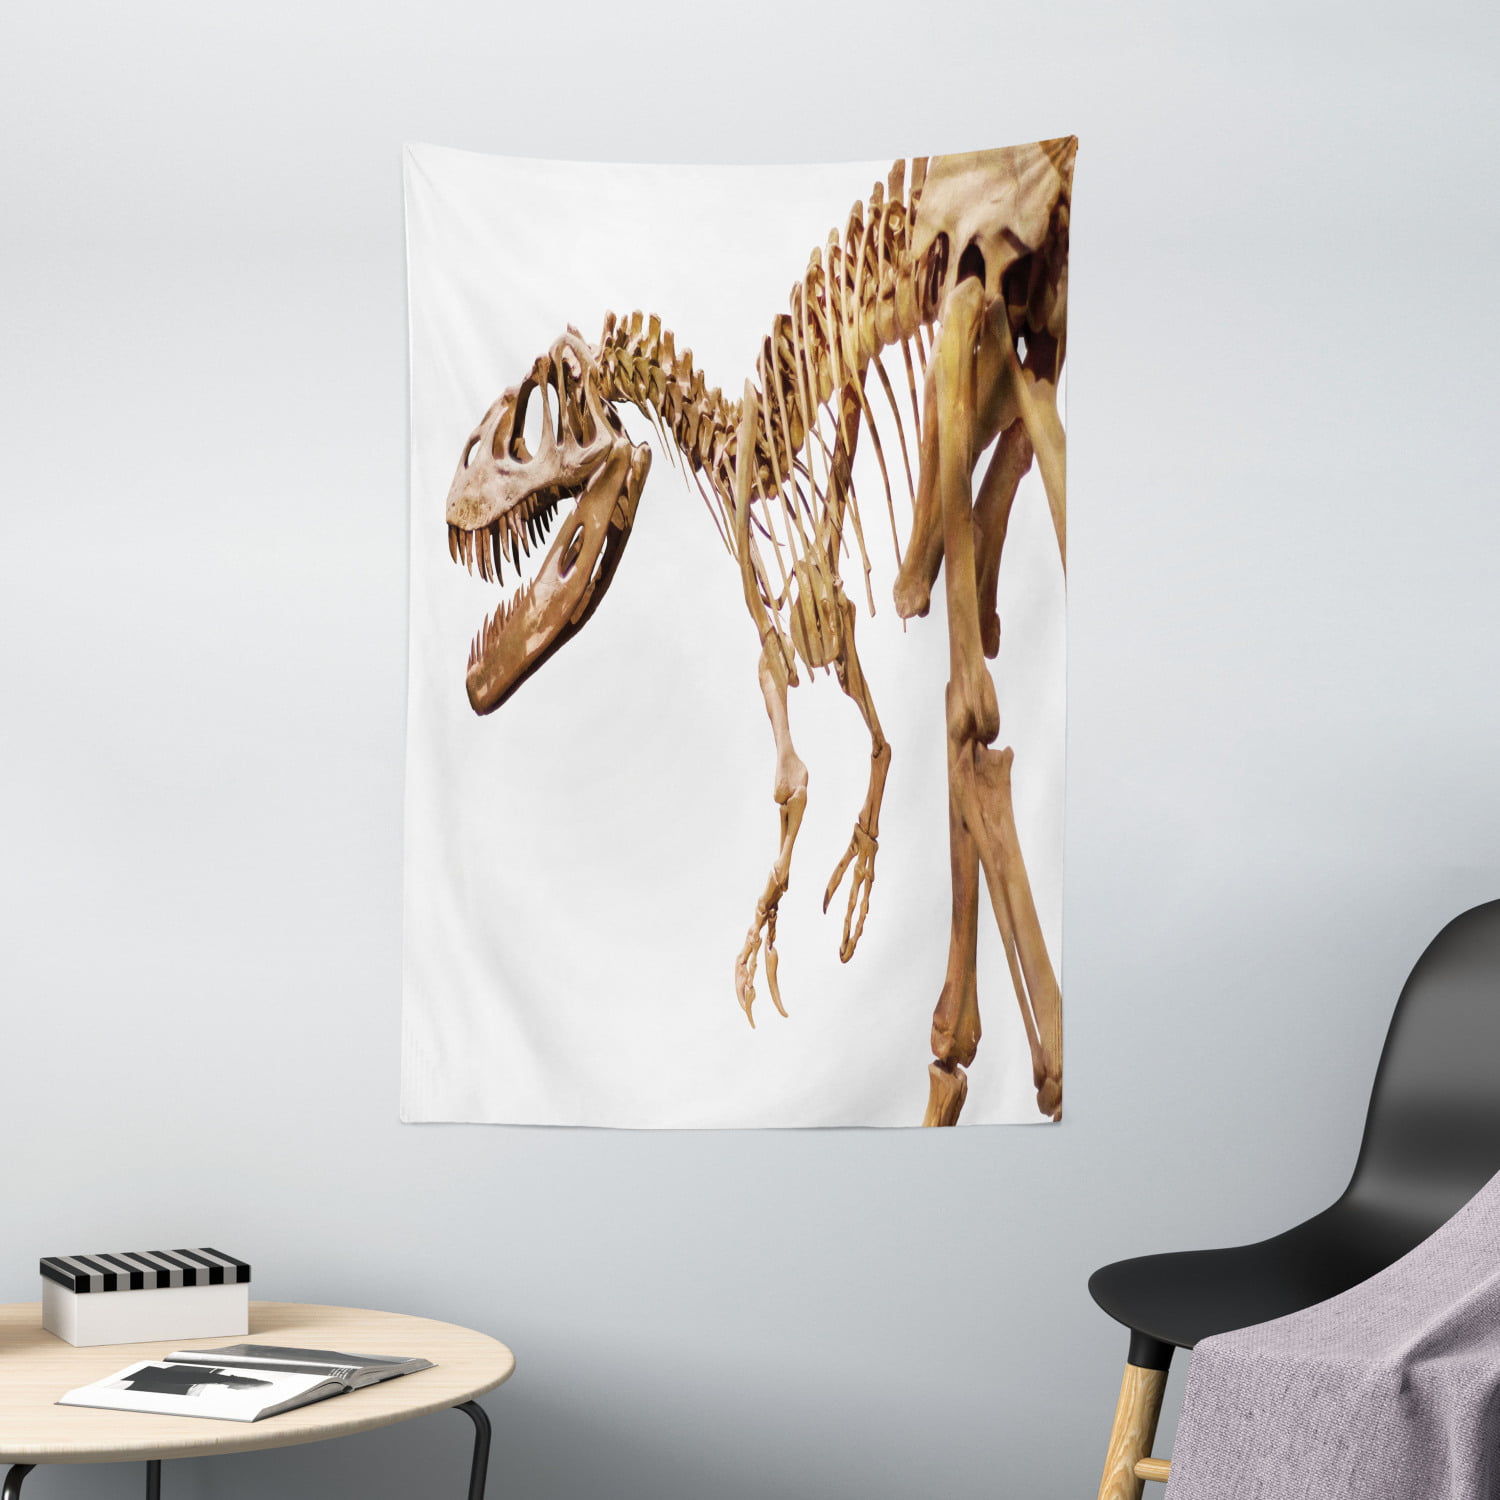 Dinosaur Tapestry, Archeology Museum Theme Wild Tyrannosaurus Rex Skeleton  Jurassic Period, Wall Hanging for Bedroom Living Room Dorm Decor, 40W X 60L  Inches, Light Caramel White, by Ambesonne 